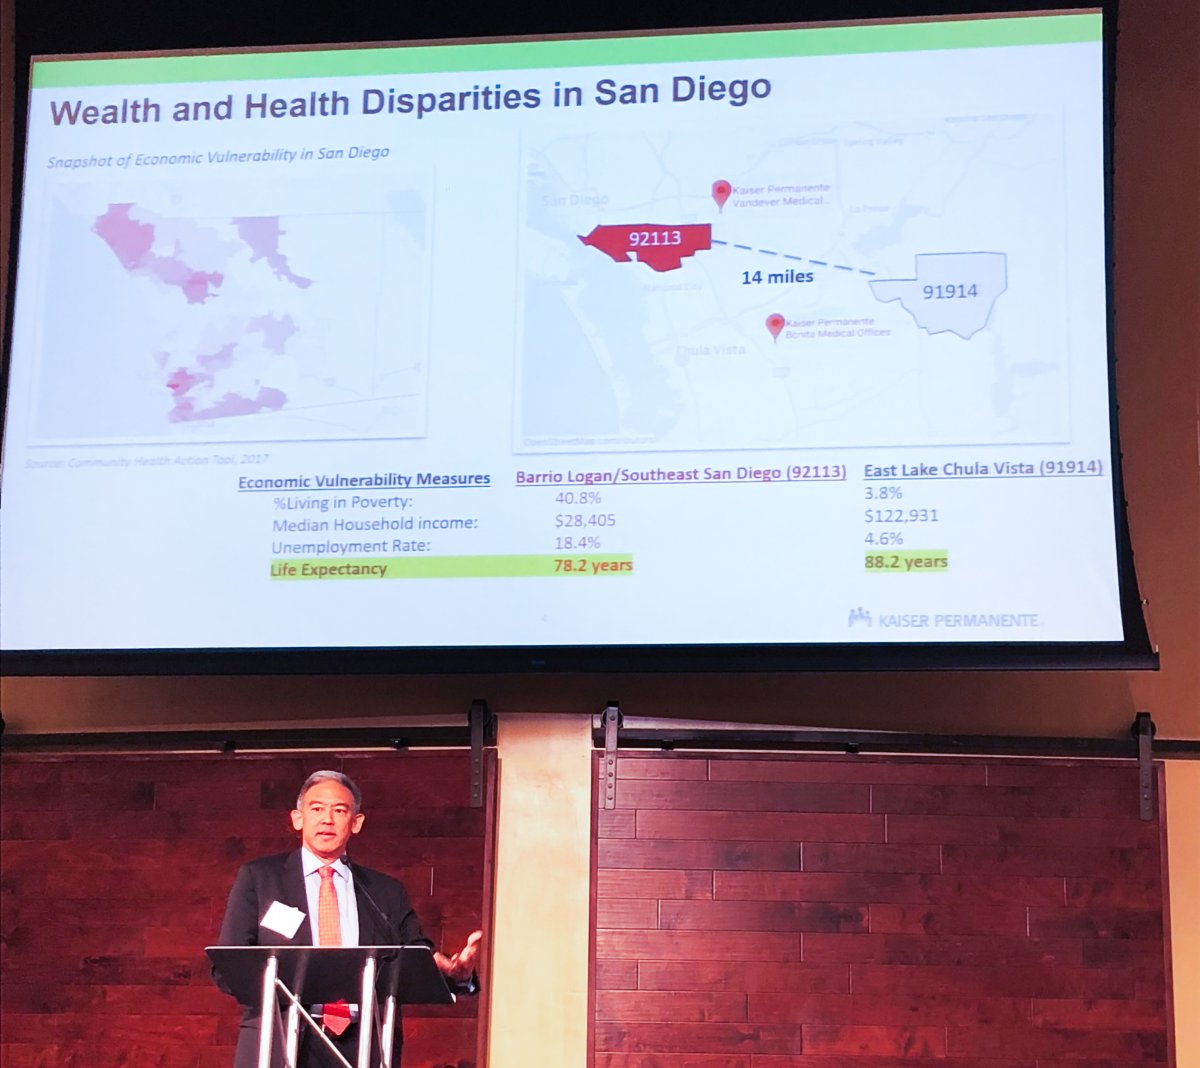 Wealth and health disparities in San Diego